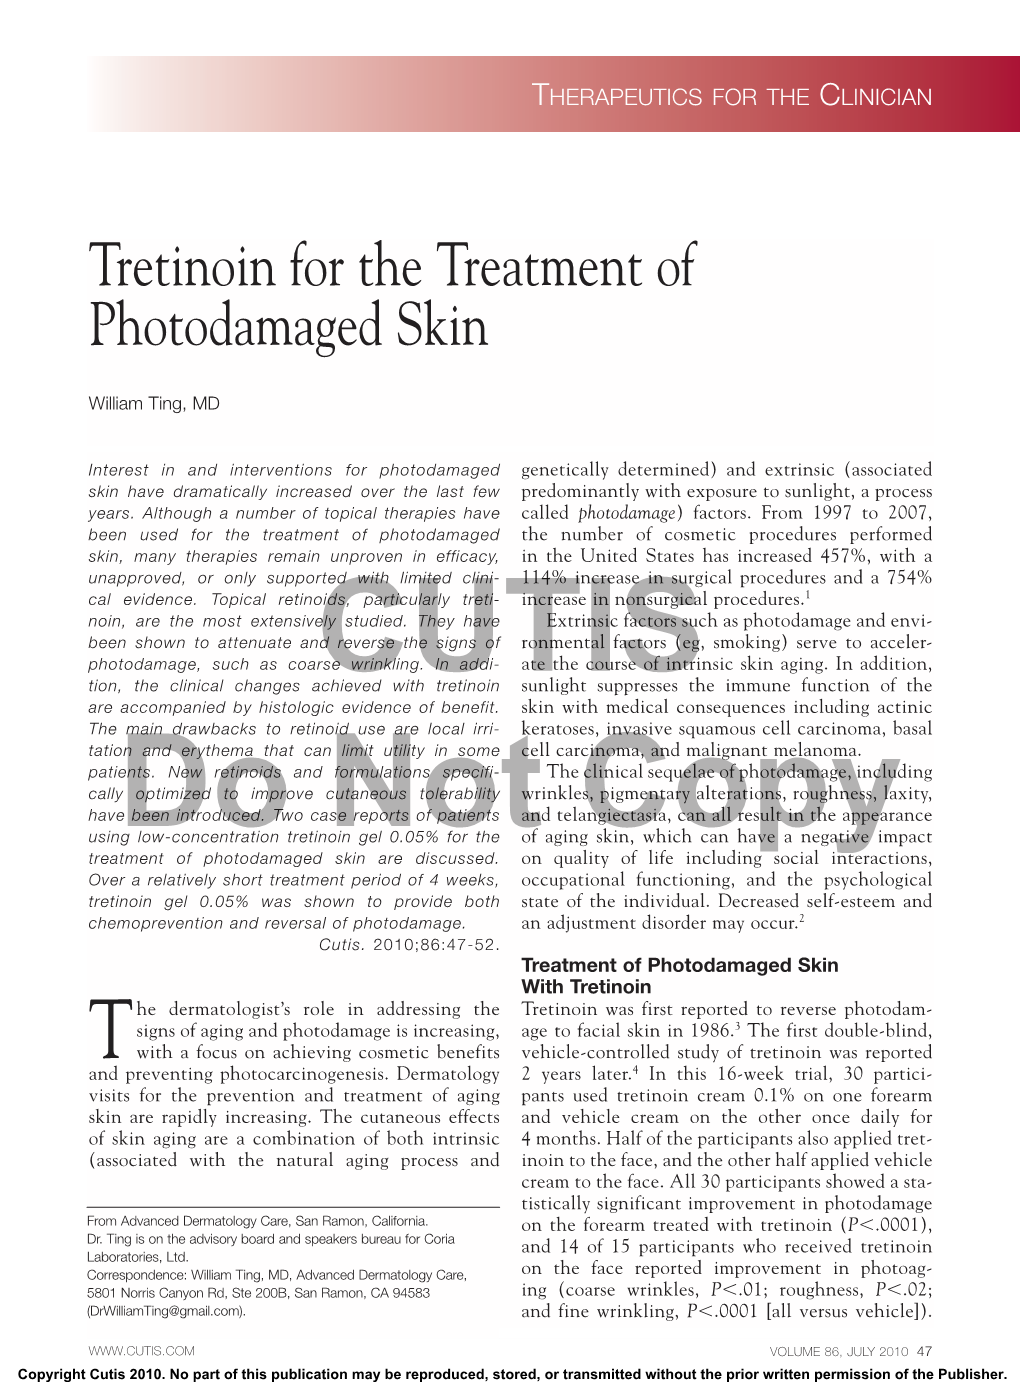 Tretinoin for the Treatment of Photodamaged Skin